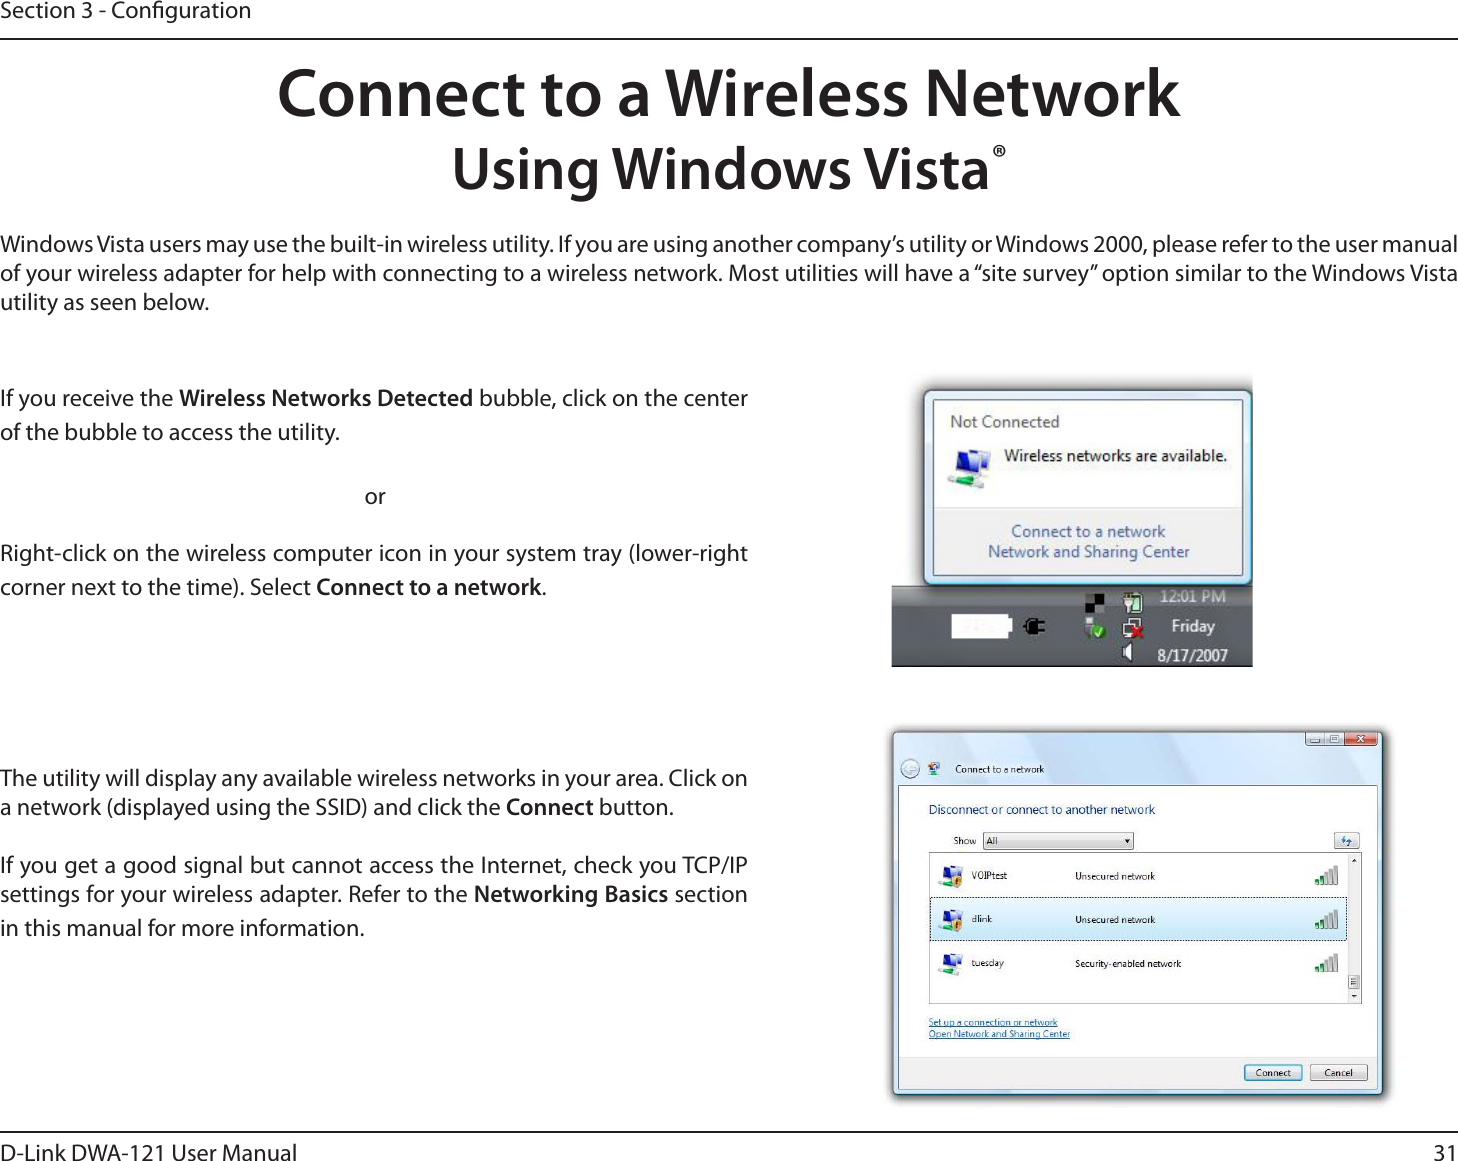 31D-Link DWA-121 User ManualSection 3 - CongurationConnect to a Wireless NetworkUsing Windows Vista®Windows Vista users may use the built-in wireless utility. If you are using another company’s utility or Windows 2000, please refer to the user manual of your wireless adapter for help with connecting to a wireless network. Most utilities will have a “site survey” option similar to the Windows Vista utility as seen below.Right-click on the wireless computer icon in your system tray (lower-right corner next to the time). Select Connect to a network.If you receive the Wireless Networks Detected bubble, click on the center of the bubble to access the utility.     orThe utility will display any available wireless networks in your area. Click on a network (displayed using the SSID) and click the Connect button.If you get a good signal but cannot access the Internet, check you TCP/IP settings for your wireless adapter. Refer to the Networking Basics section in this manual for more information.